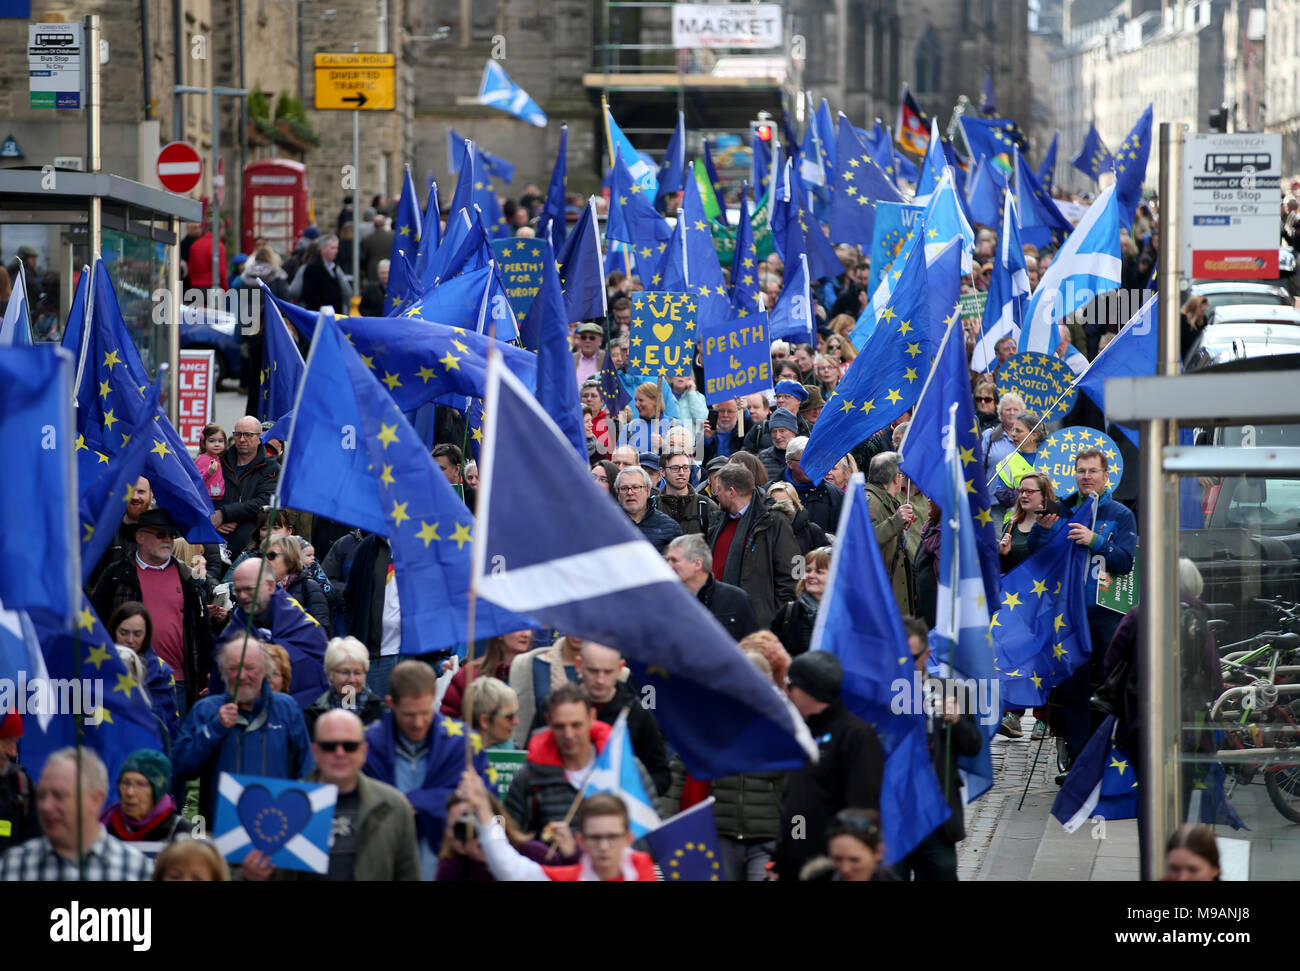 Demonstrators at a Brexit protest march in Edinburgh, which is demanding a final vote on the Brexit deal. Stock Photo